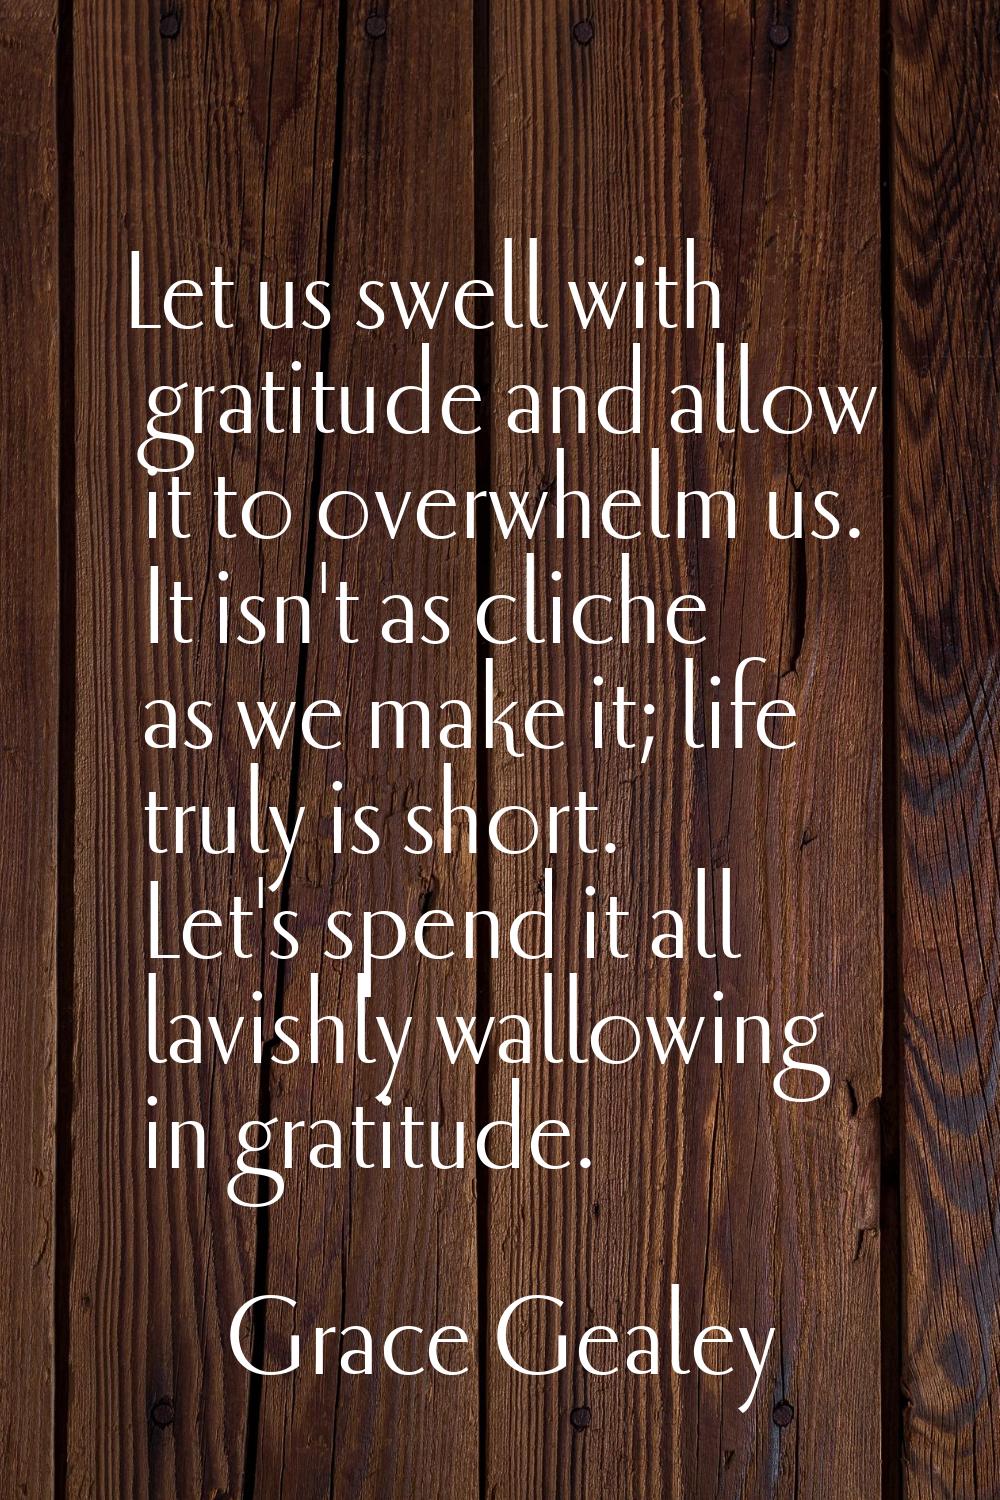 Let us swell with gratitude and allow it to overwhelm us. It isn't as cliche as we make it; life tr